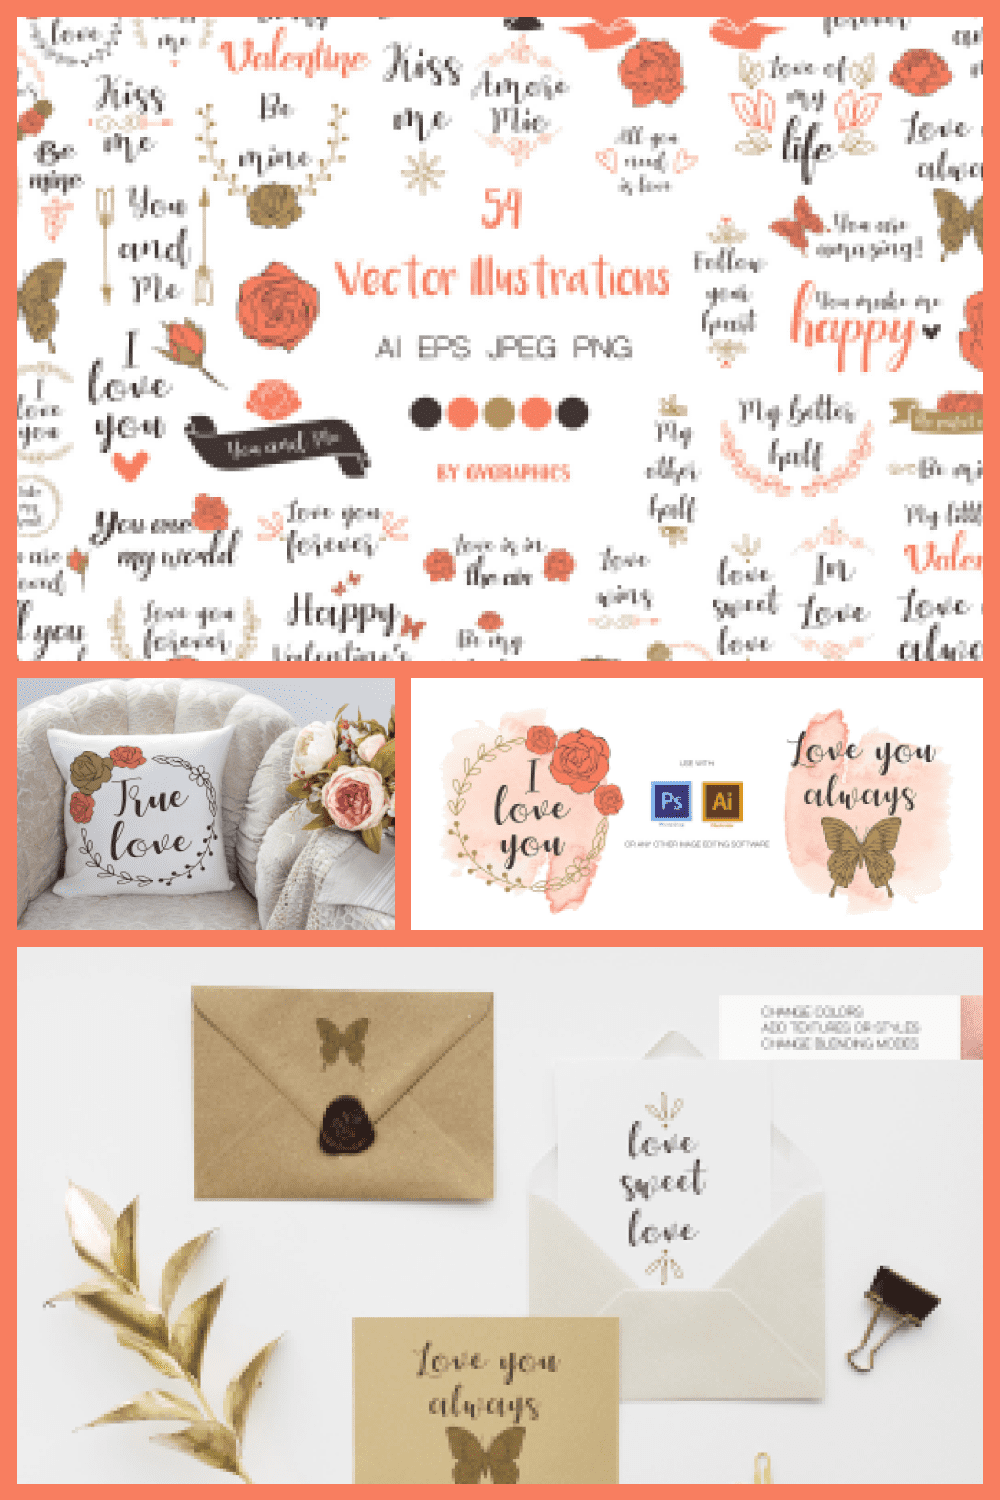 Valentine’s day Calligraphy and Roses Vector Illustrations - MasterBundles - Pinterest Collage Image.